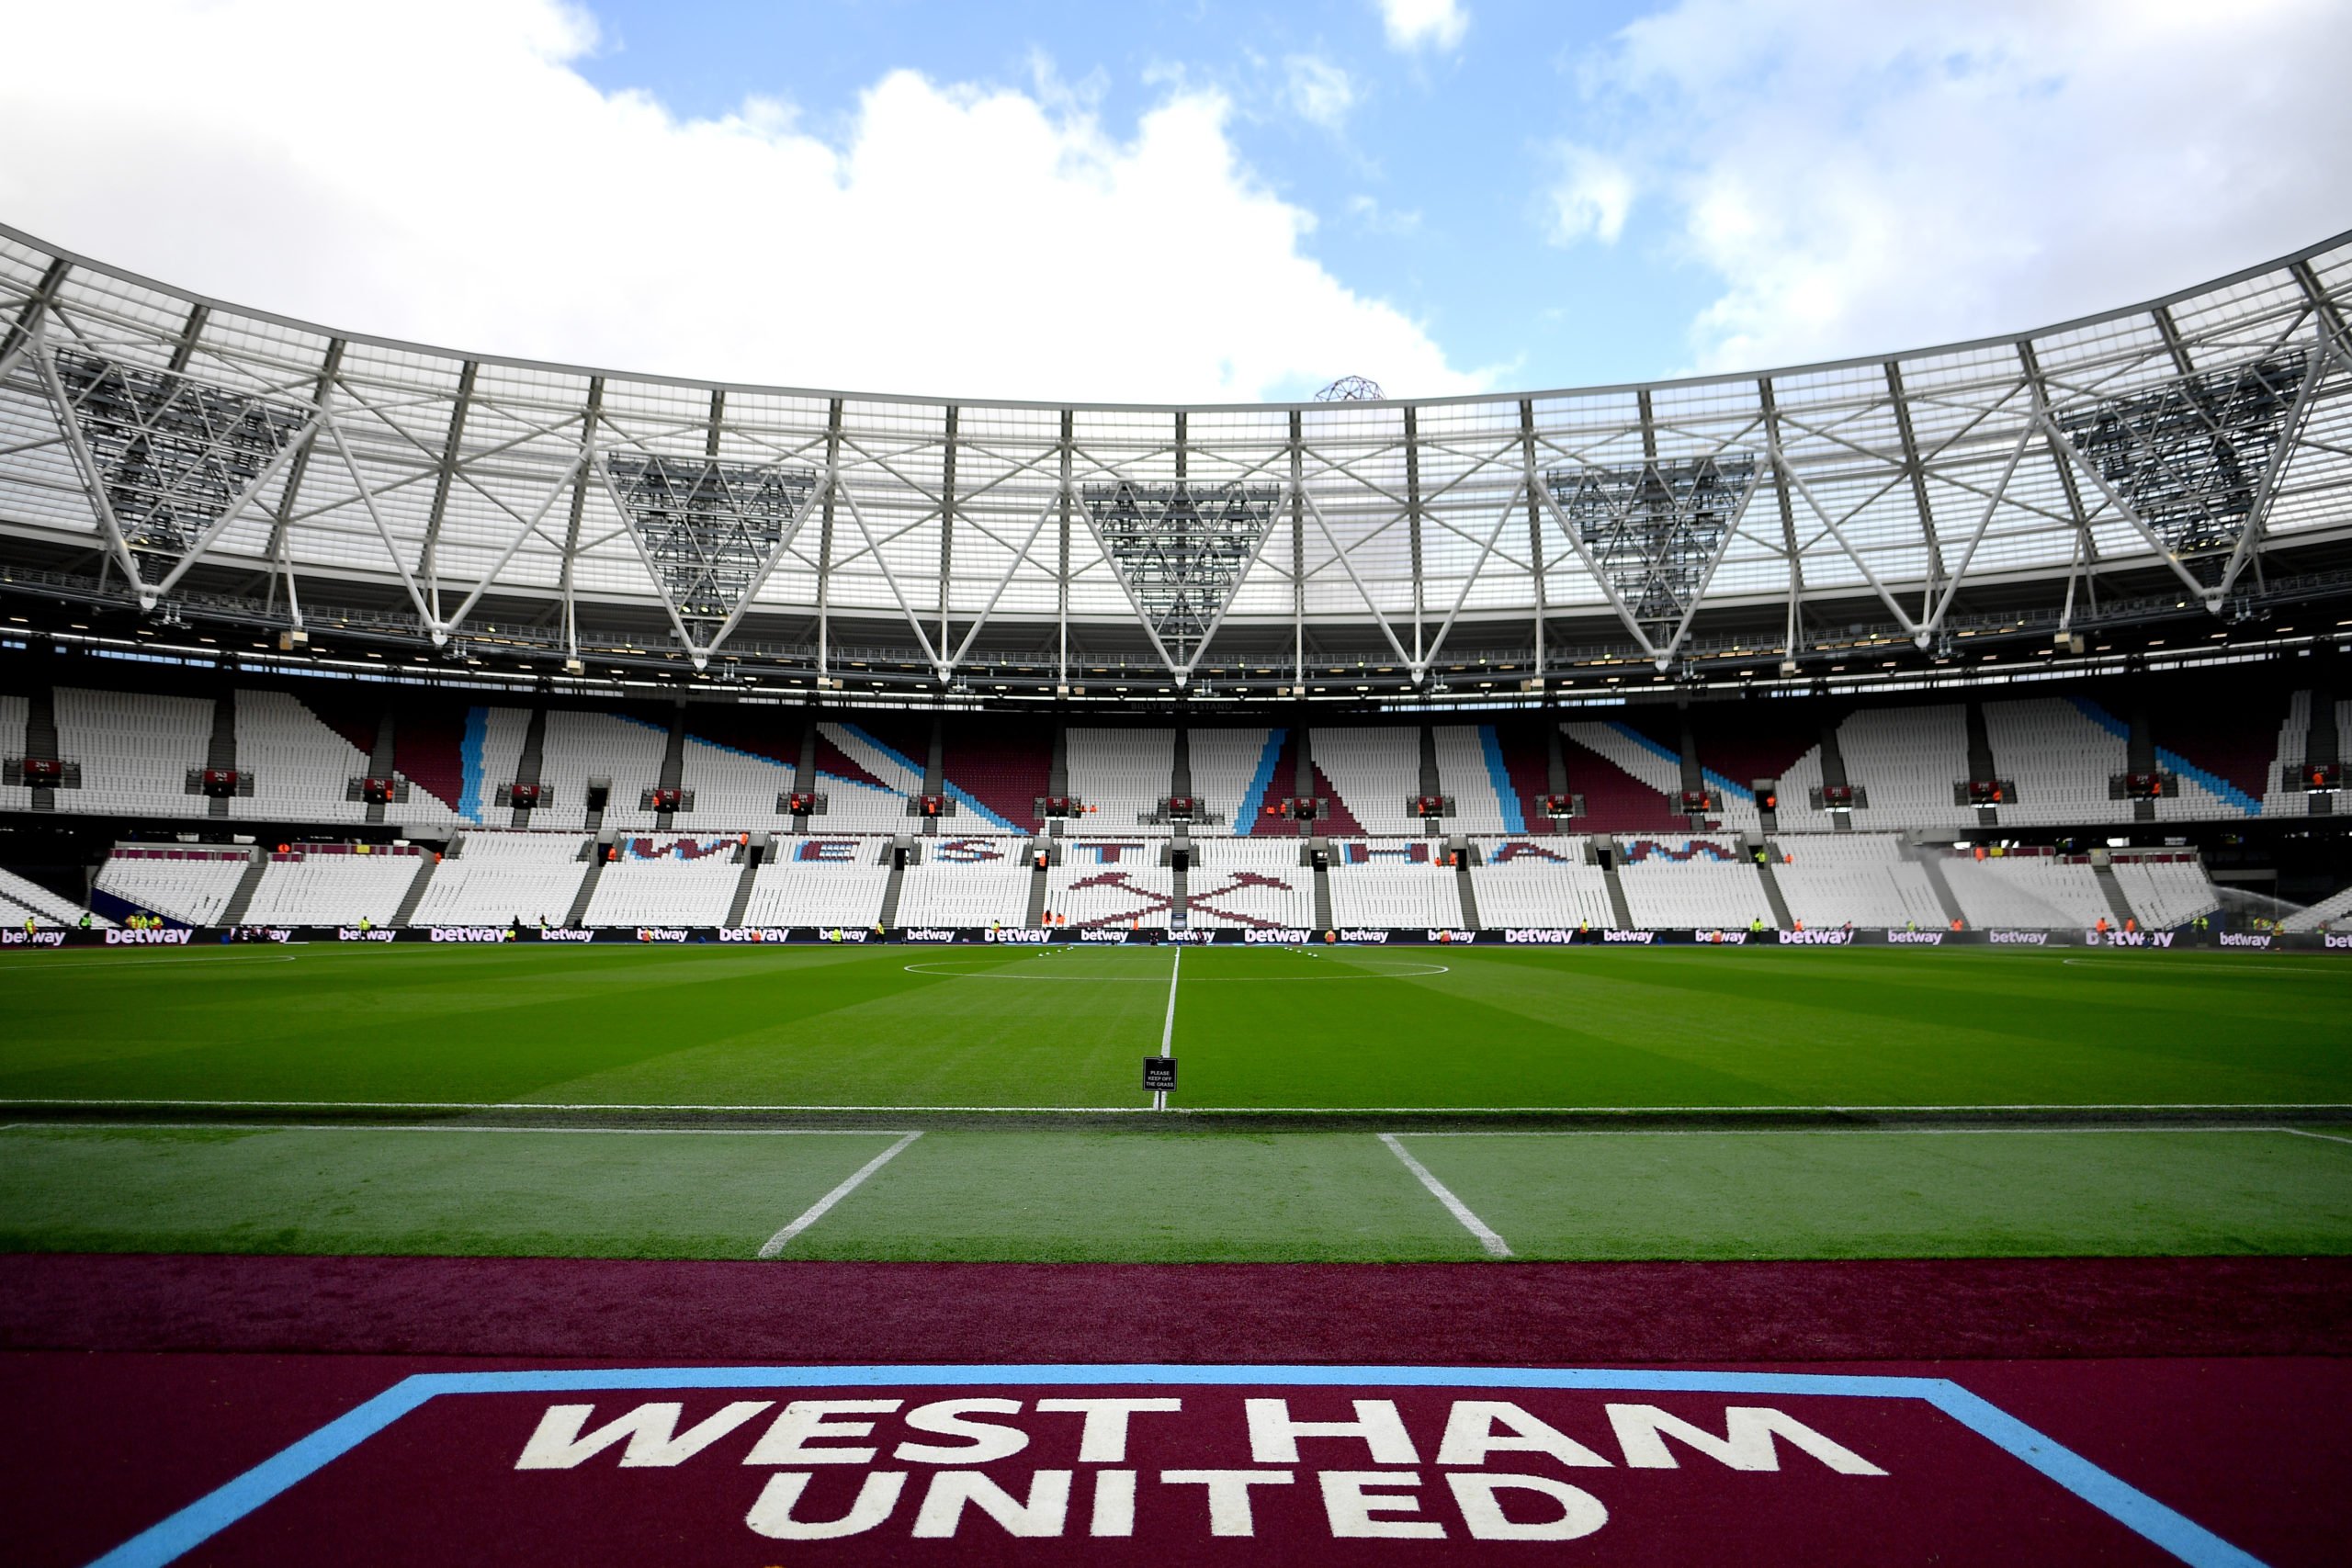 Journalist Martin Samuel makes huge claim about West Ham stadium plans with athletics expected to move out